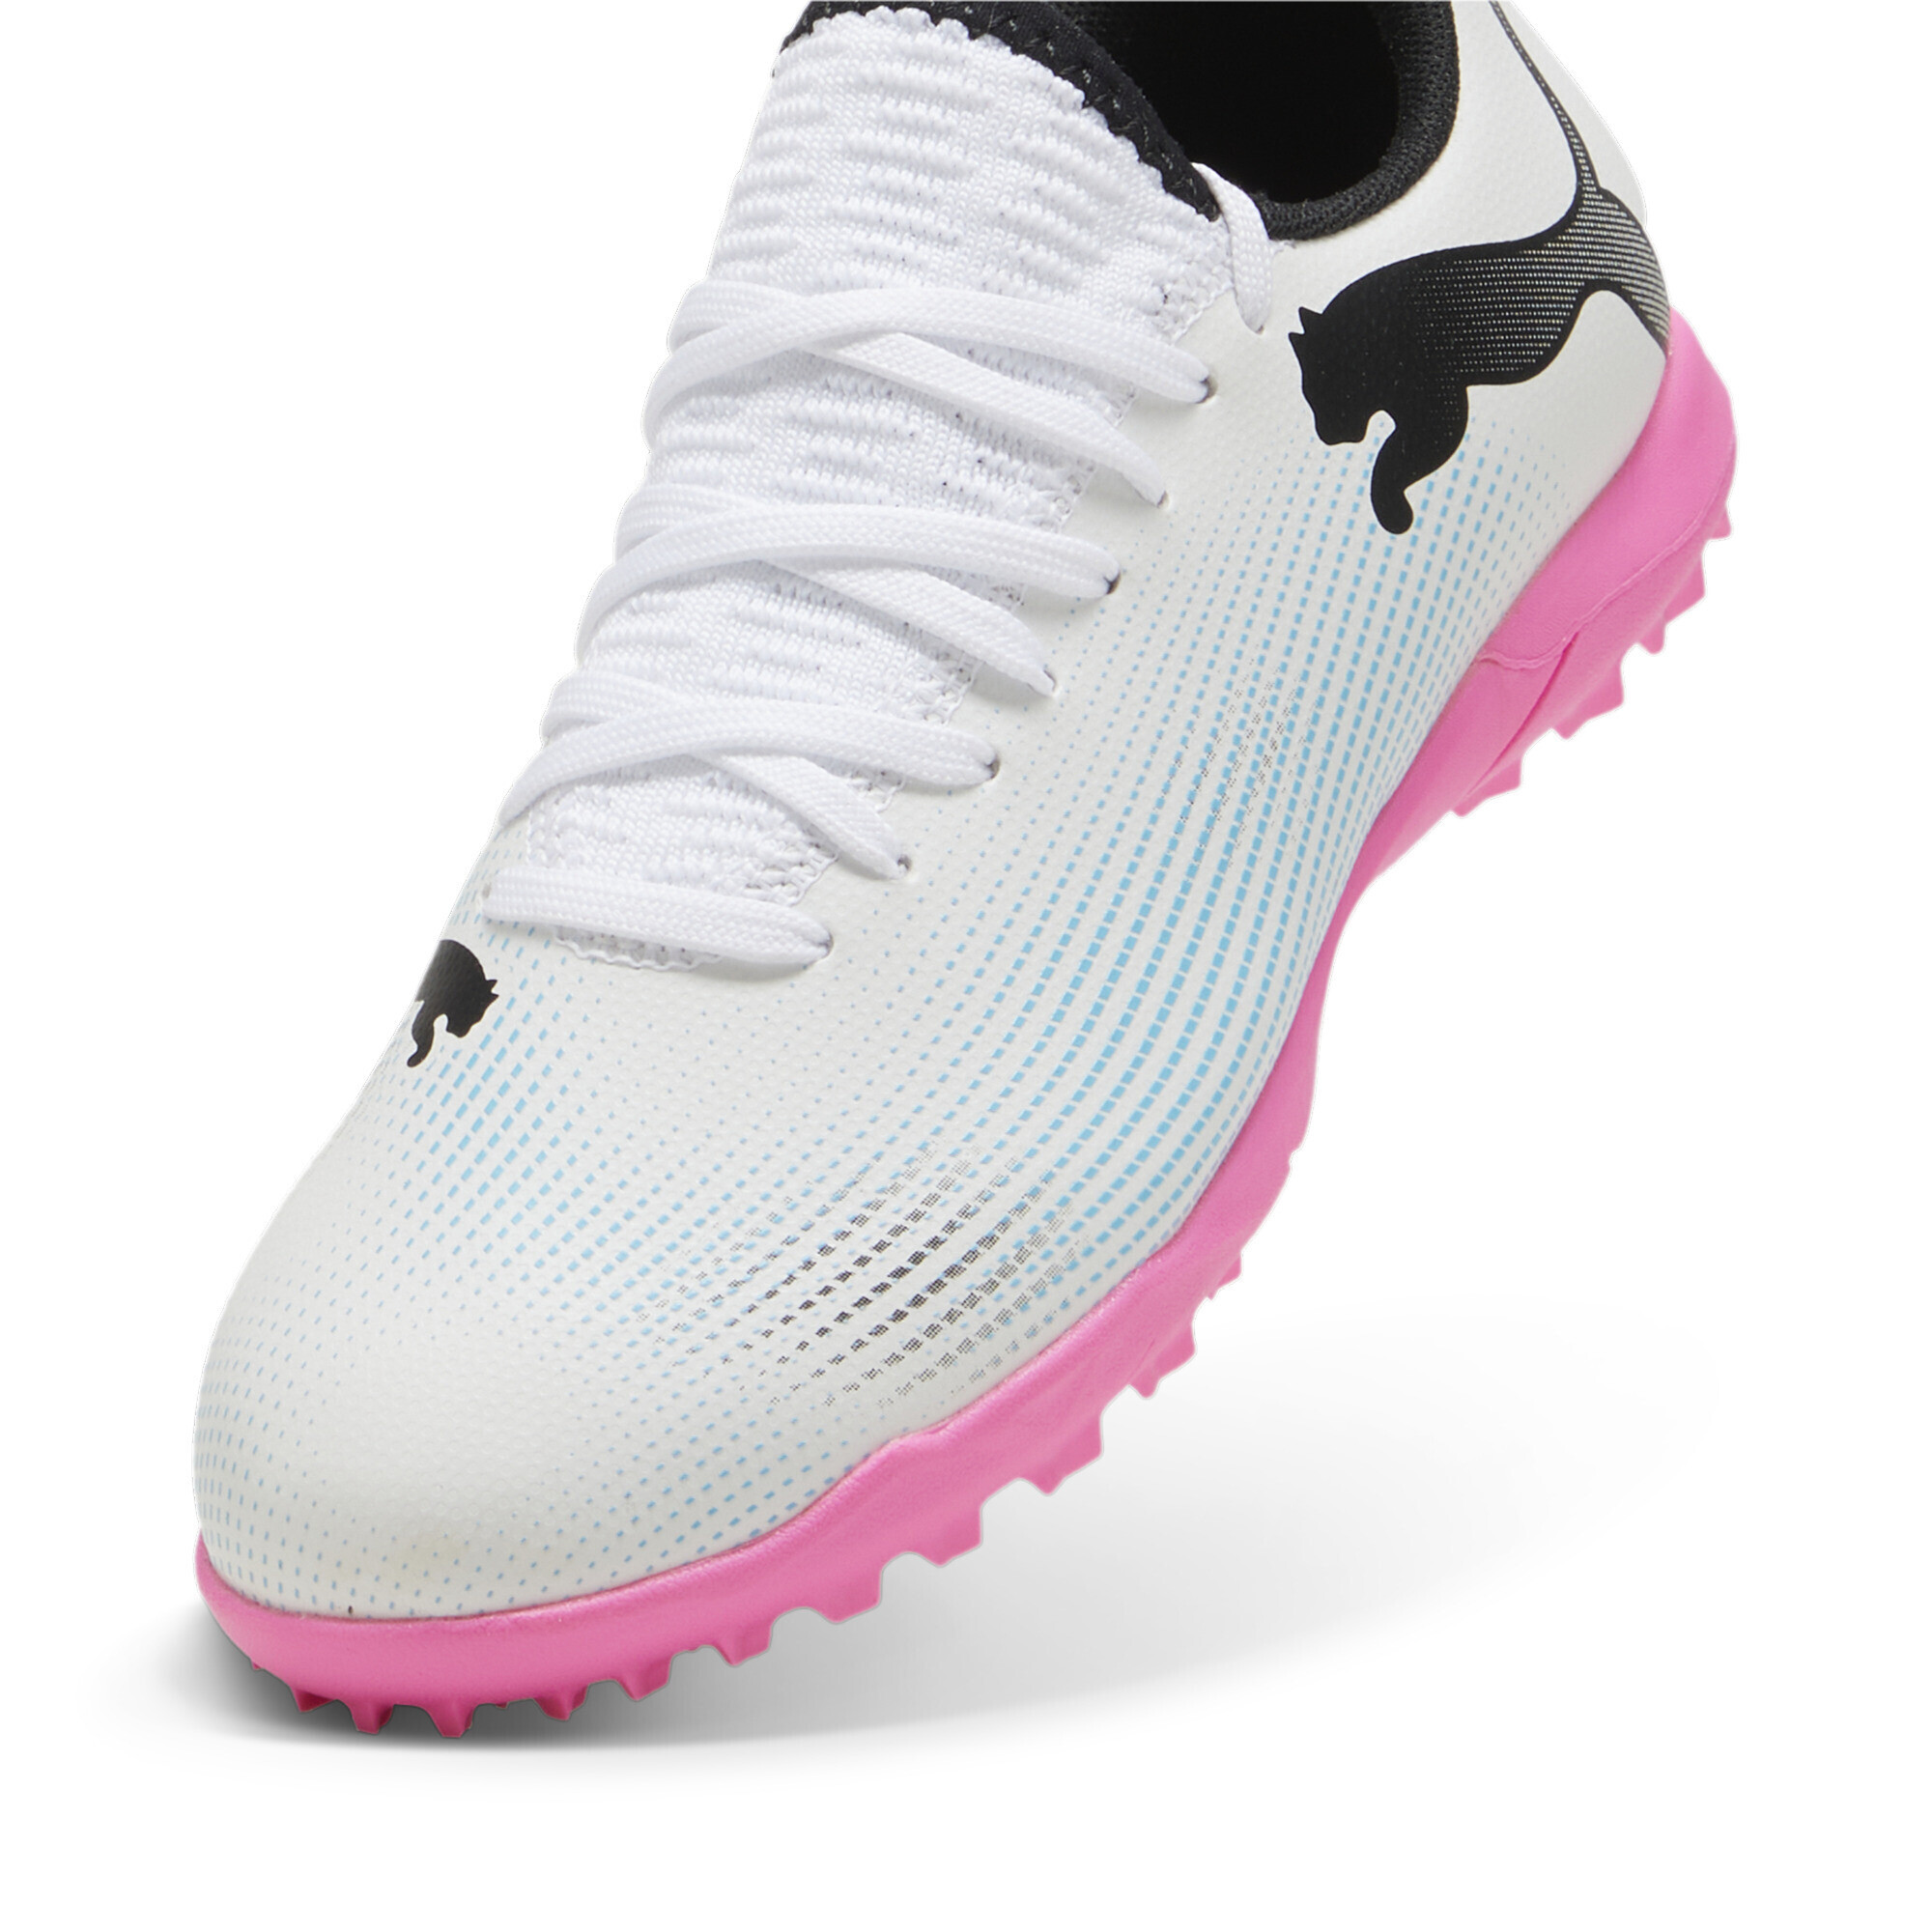 PUMA FUTURE 7 PLAY TT Youth Football Boots In White/Pink, Size EU 34